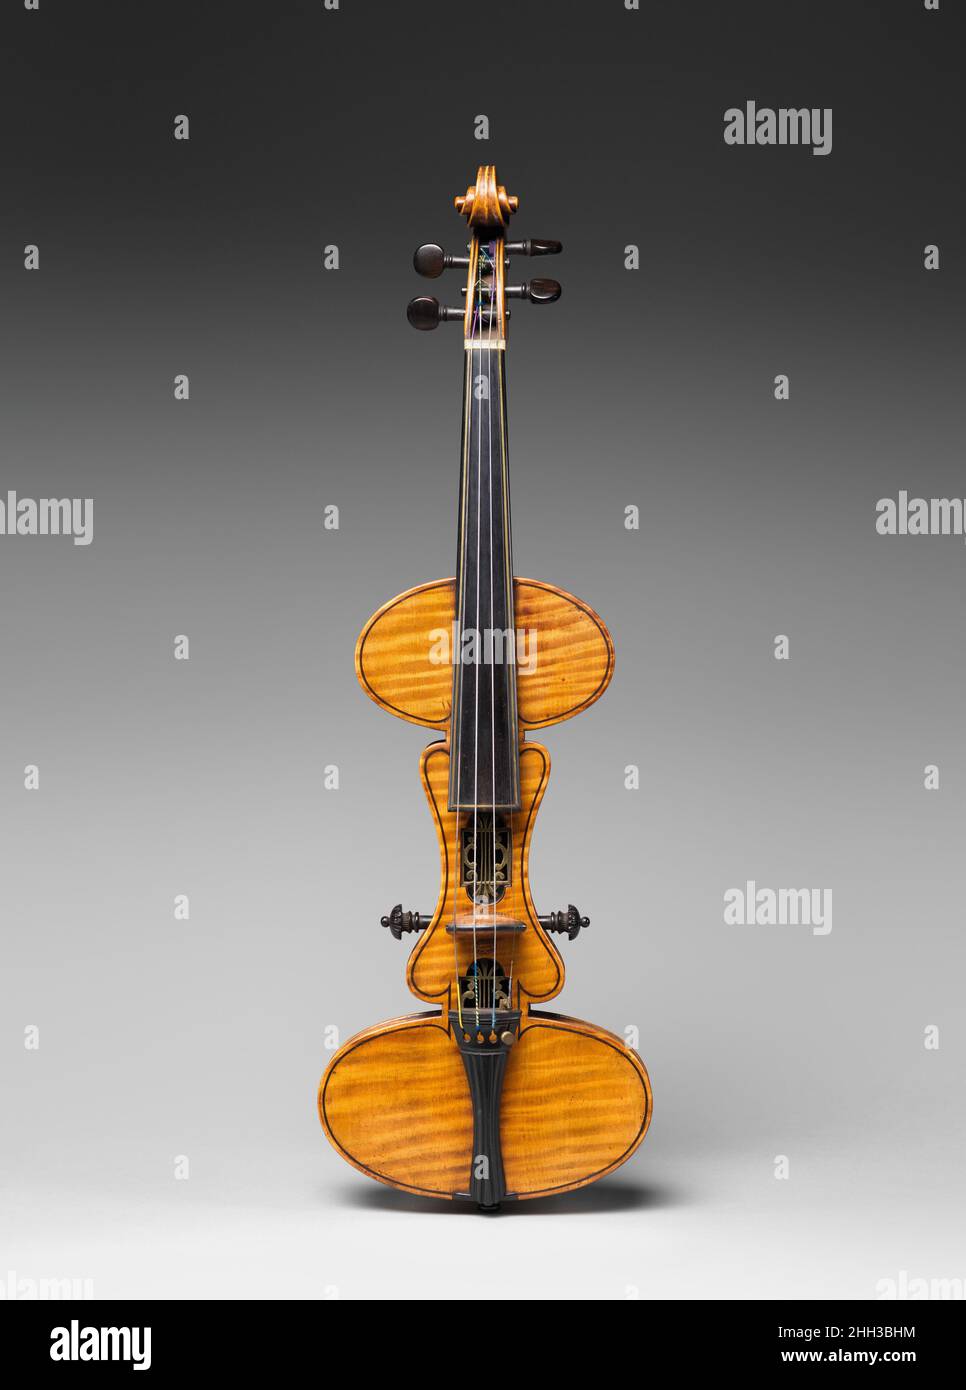 Mute Violin ca. 1886 Charles Francis Albert, Sr. Mute violins have been used as practice instruments and for special acoustical effect since the seventeenth century. Leopold Mozart used the term 'Brettgeige,' or 'board violin,' to describe a mute violin consisting of a curved board without a soundbox. Patented in 1886, this unusually shaped mute violin has a body made entirely of maple, a wood that does not vibrate freely. The bridge height can be adjusted by two pegs located on either side of the body.. Mute Violin. American. ca. 1886. Maple, ebony, brass, various other materials. Philadelphi Stock Photo